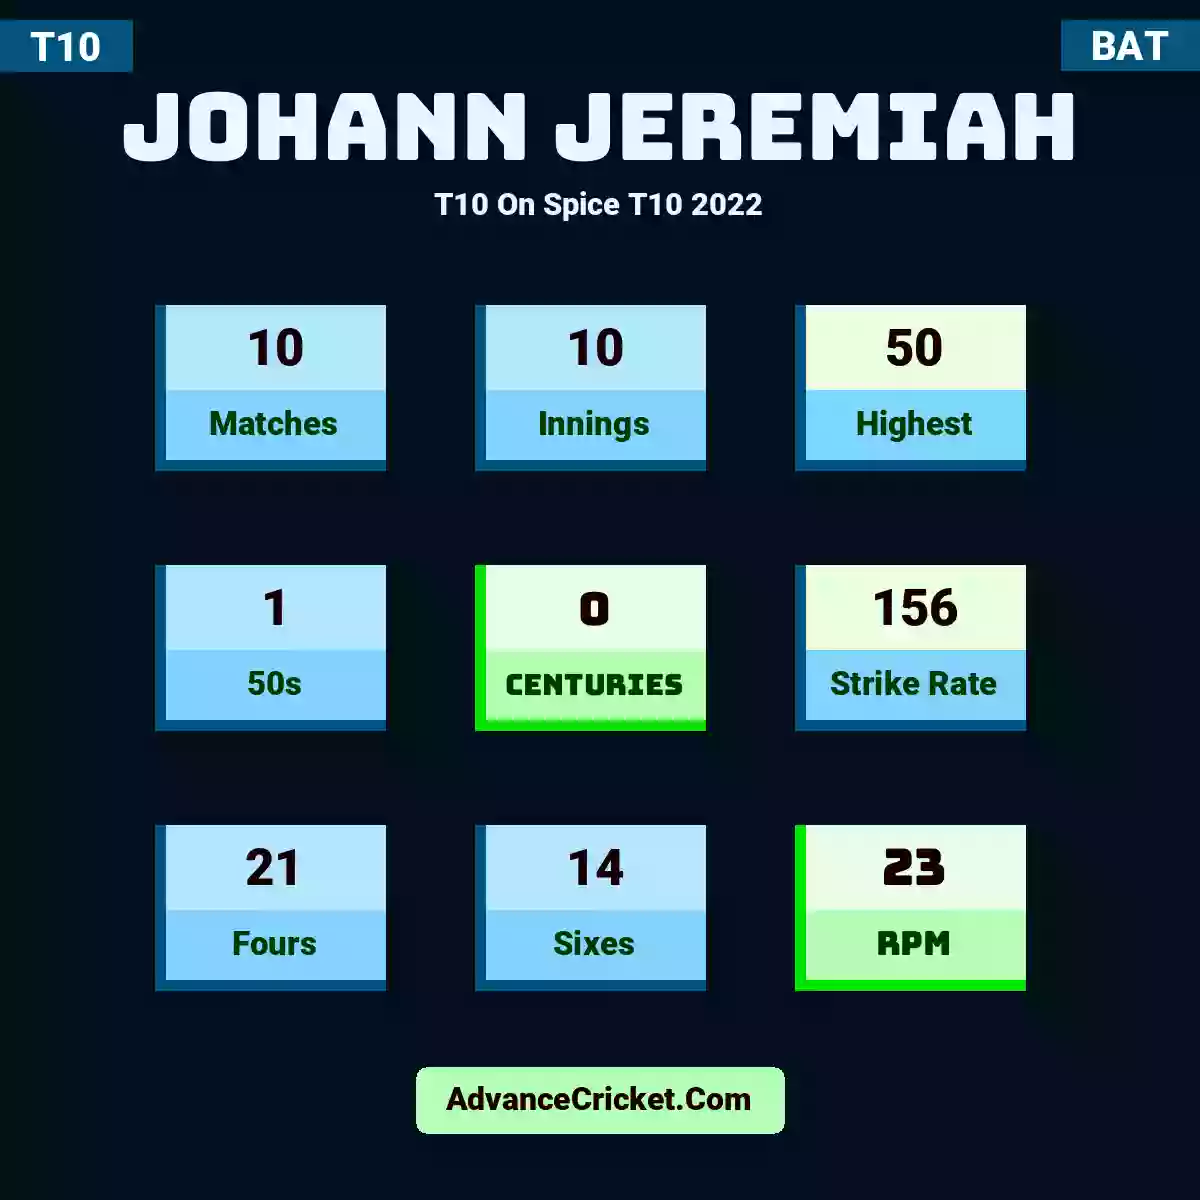 Johann Jeremiah T10  On Spice T10 2022, Johann Jeremiah played 10 matches, scored 50 runs as highest, 1 half-centuries, and 0 centuries, with a strike rate of 156. J.Jeremiah hit 21 fours and 14 sixes, with an RPM of 23.